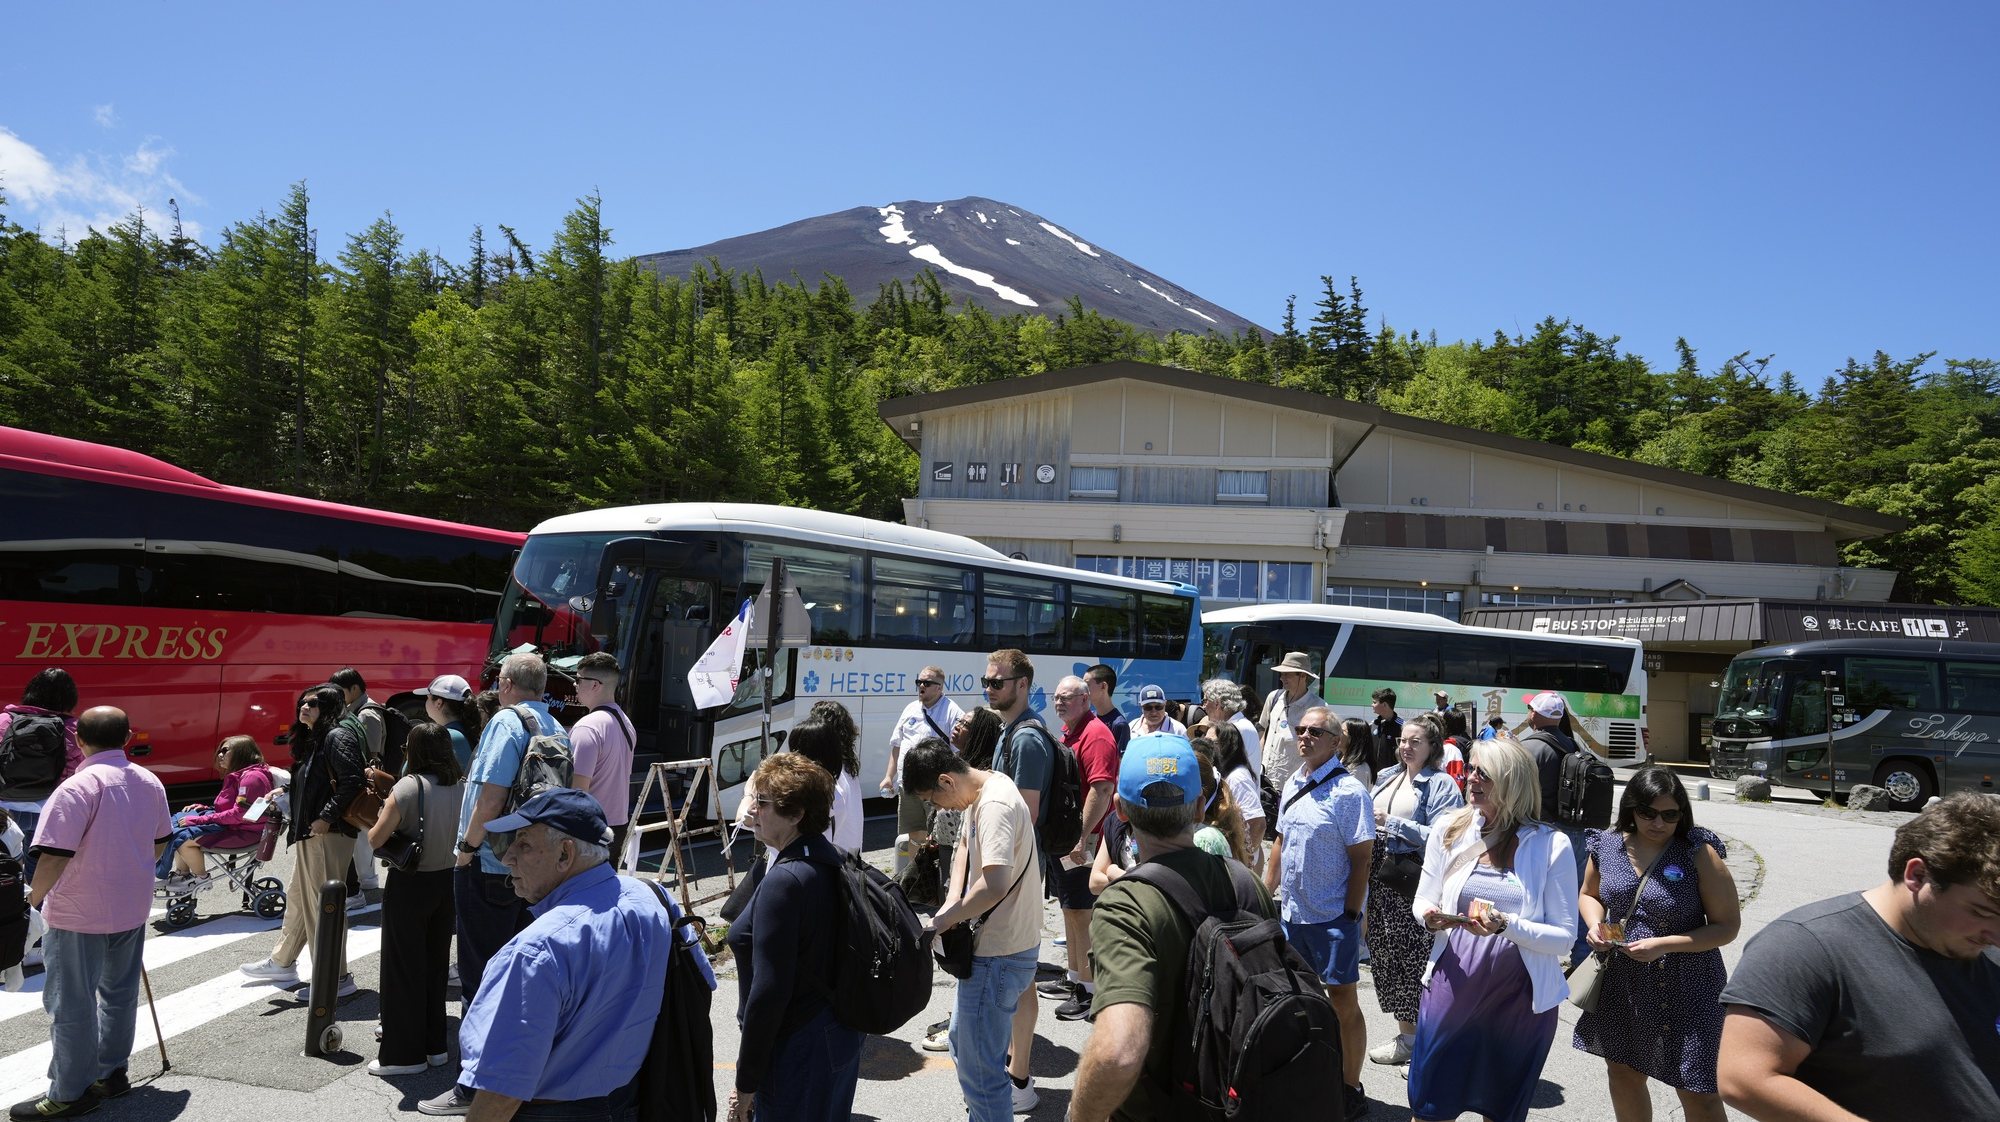 epa11421894 Tourists from abroad gather near buses at Mount Fuji 5th station as the summit is seen in the background in Yamanashi prefecture, Japan, 19 June 2024. For the first time, the prefecture will start collecting a mandatory hiking fee of 2000 yen (about 12 euros) per person and an optional &#039;donation fee&#039; of 1000 yen (6 euros) per person for climbing the Mount Fuji from the 5th station. An online reservation system started operations on 20 May 2024 ahead of the opening of the Mt. Fuji Yoshida Route on 01 July 2024. Also, access to the Yoshida Route will be limited to 4000 people per day during the hiking season from 01 July until 10 September 2024. According to data released by Japan National Tourism Organization on 19 June 2024, the number of foreign visitors traveling to Japan topped the three million mark for the third month in a row, an increase of 60 percent from the same month of 2023.  EPA/FRANCK ROBICHON